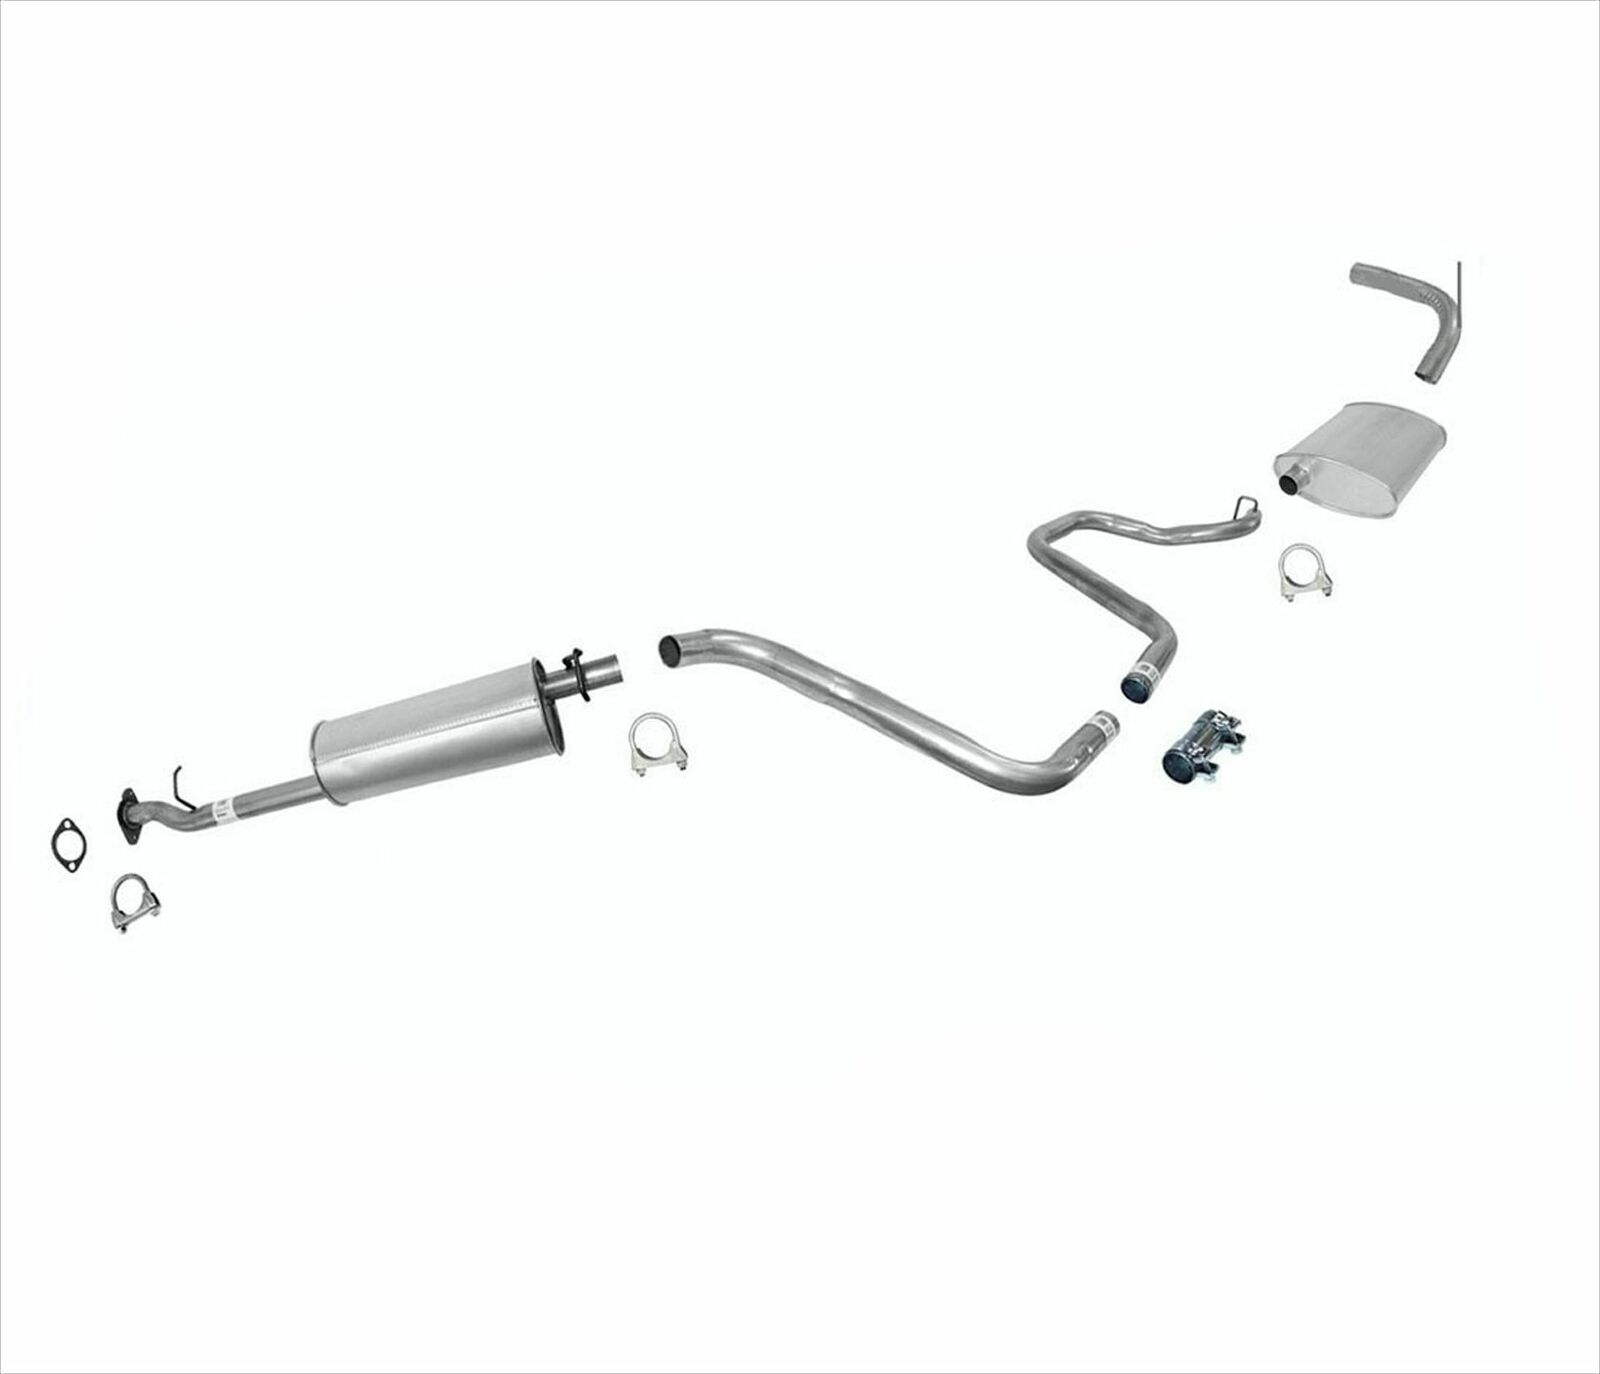 Fits For 2004-2008 Chevrolet Malibu 2.2L 4 Cylinder Eng. Muffler Exhaust System